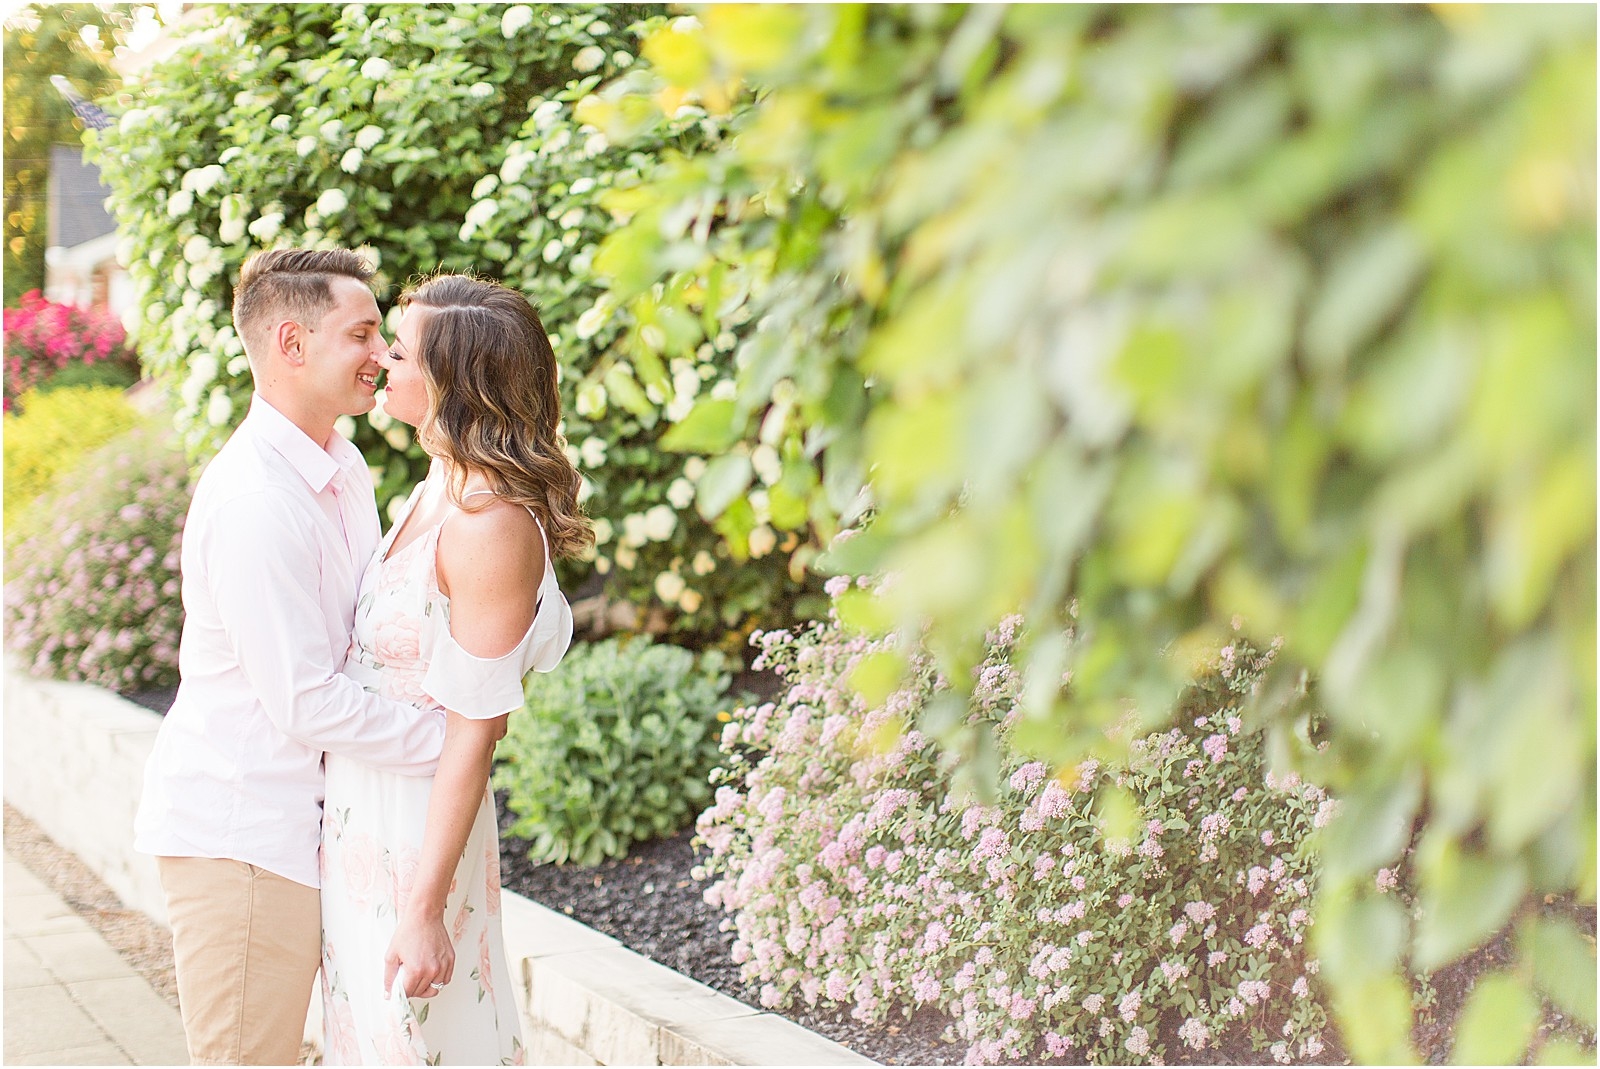 20 West Downtown Newburgh Anniversary Session | Katie and Bobby | Bret and Brandie Photography 006.jpg